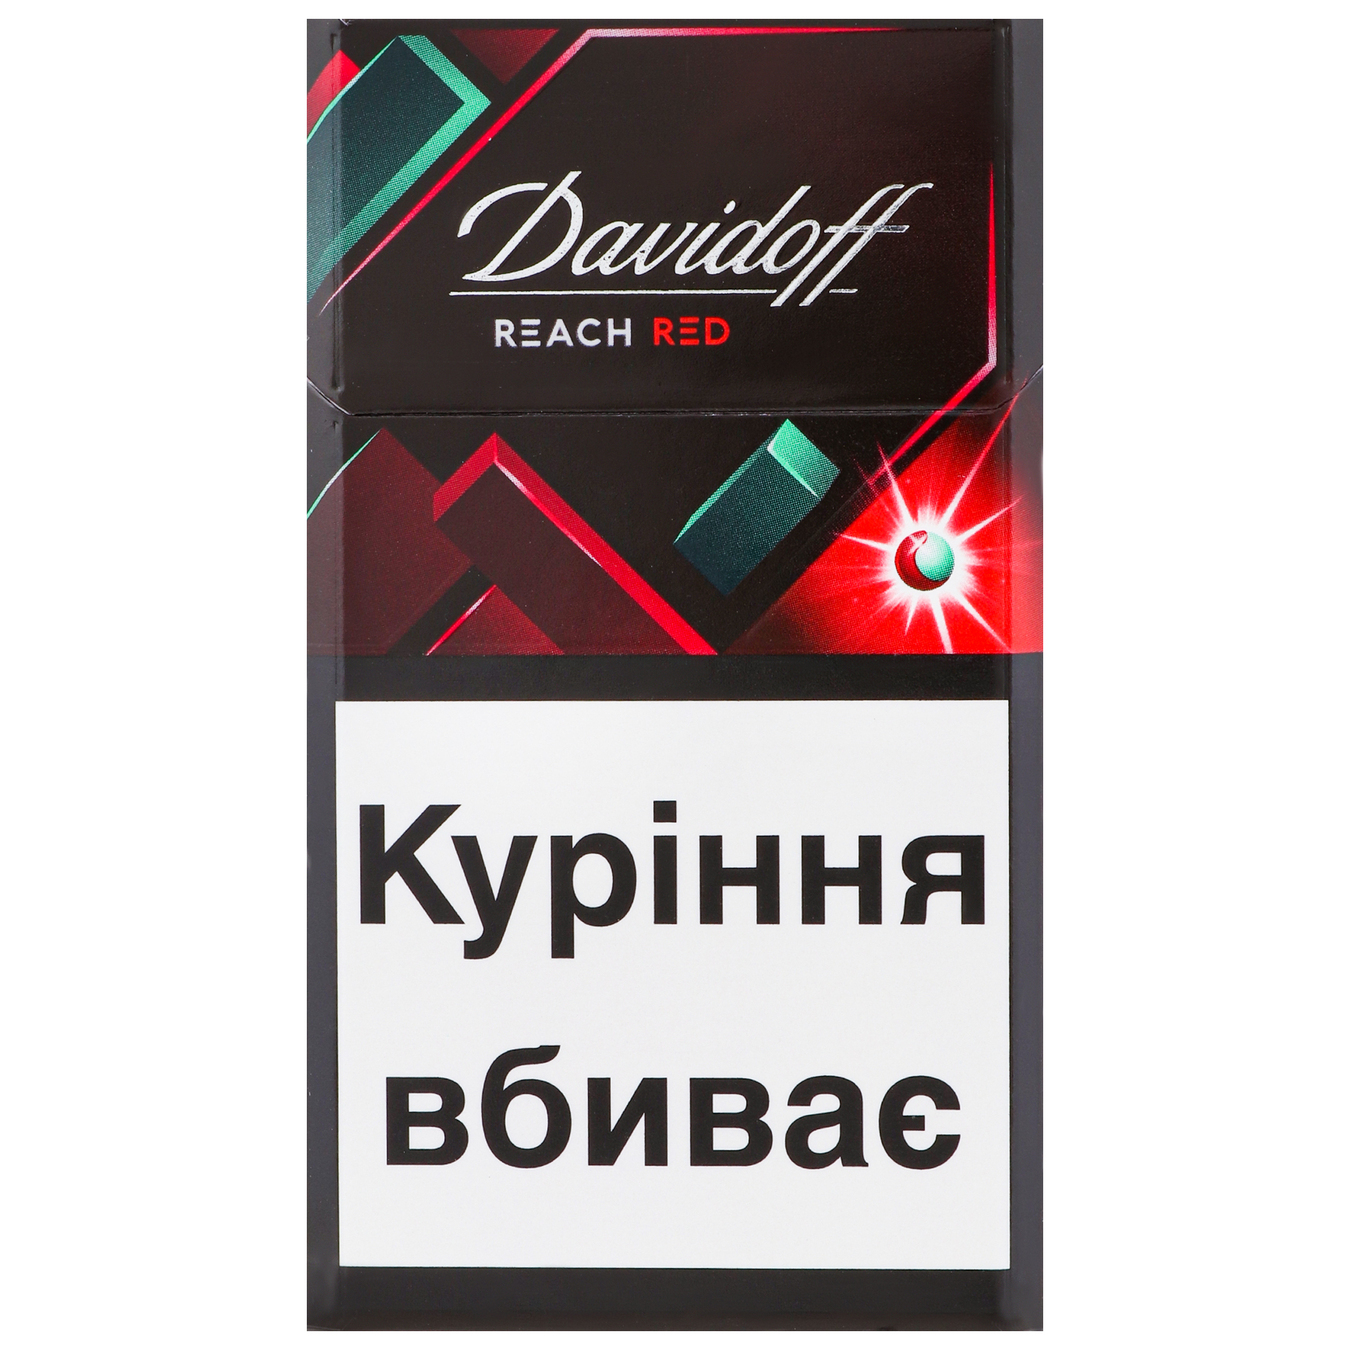 Davidoff Reach Red Fusion 20 cigarettes (the price is without excise tax)